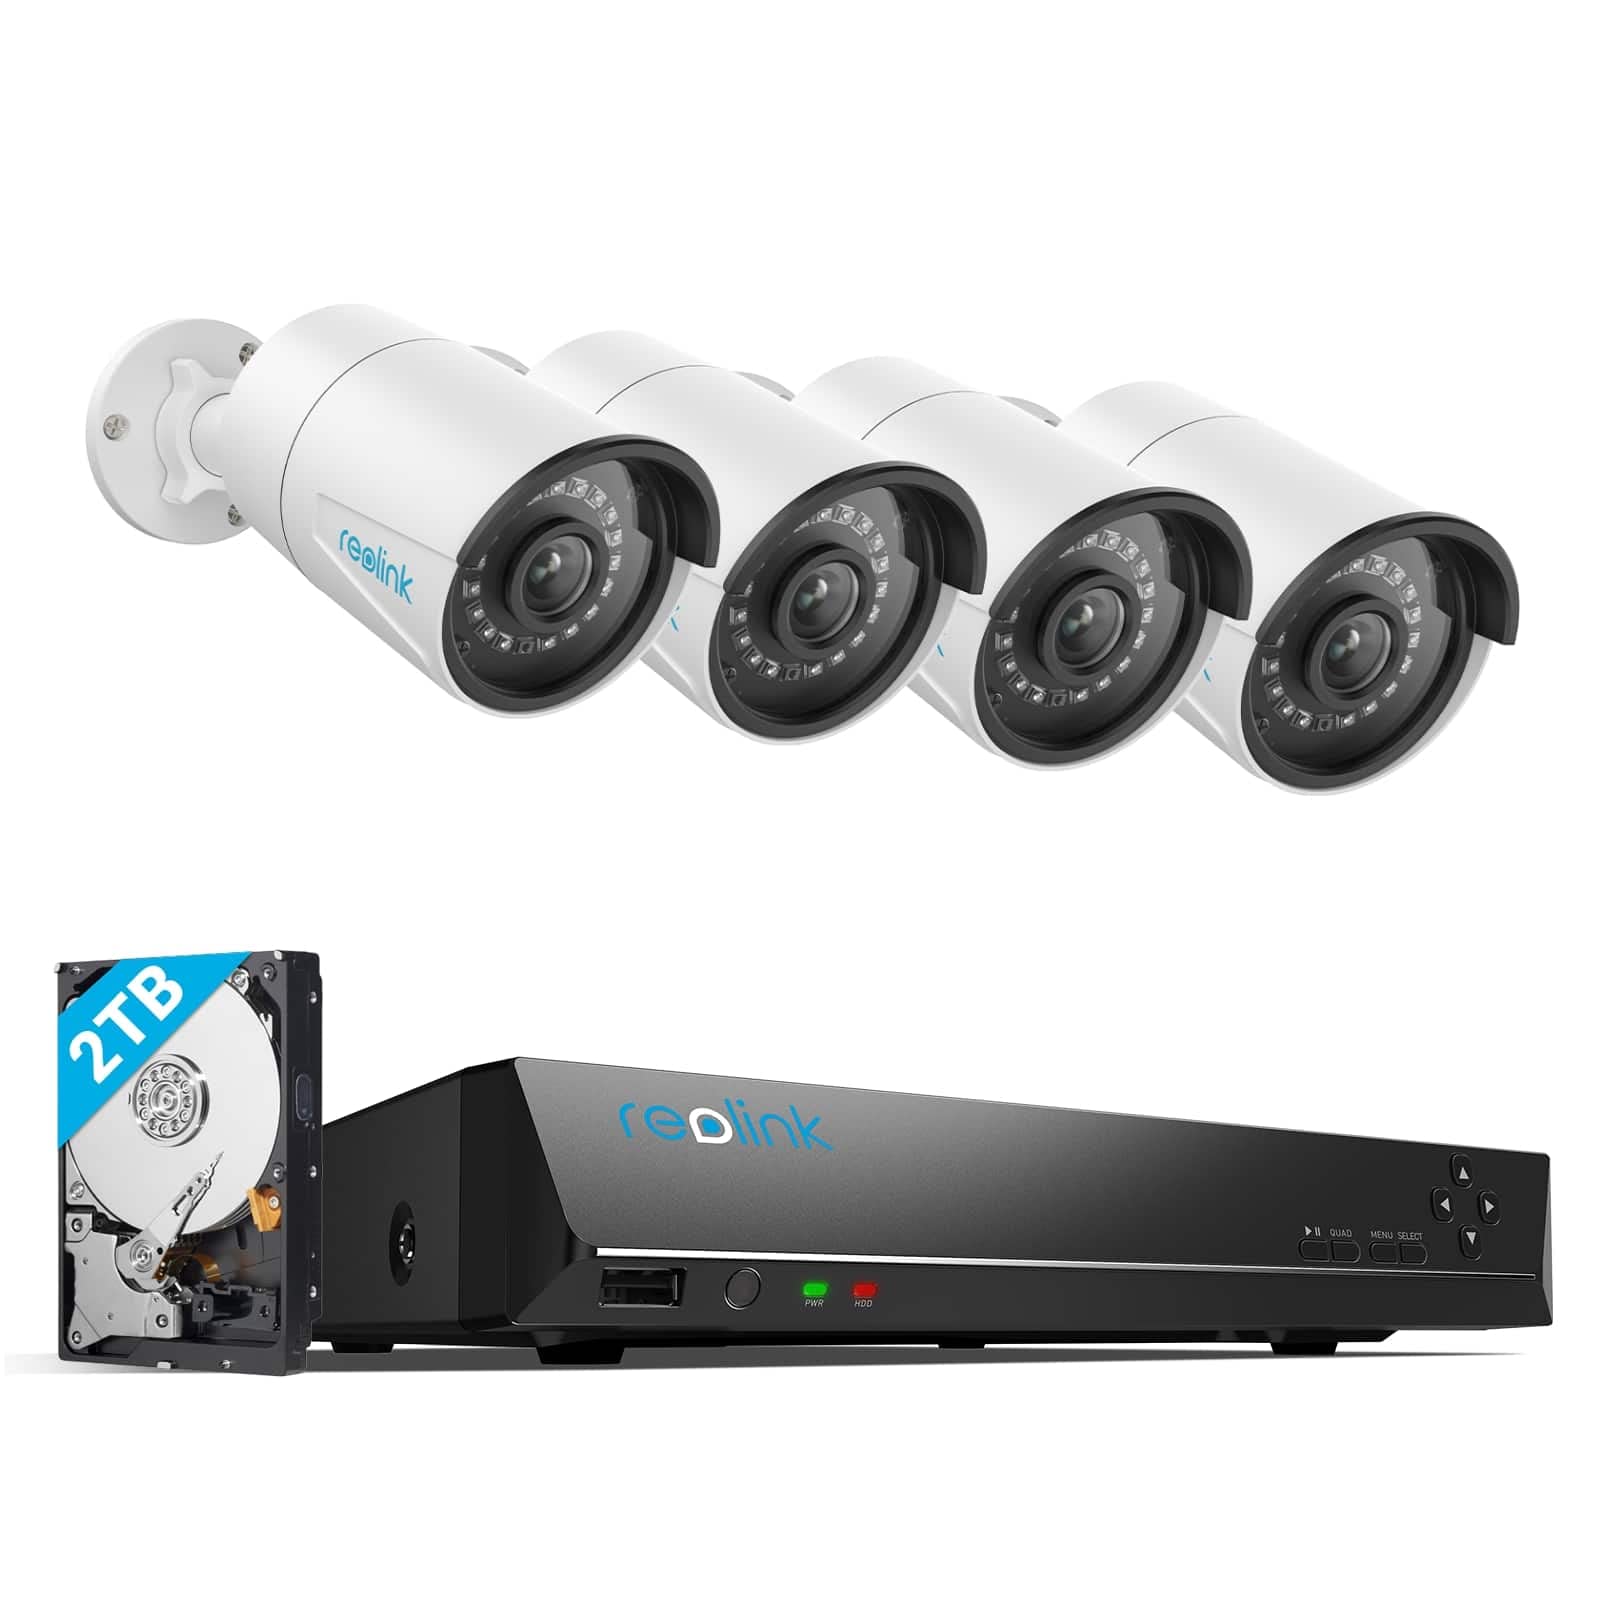 Book Cover REOLINK 8CH 5MP Home Security Camera System, 4pcs Wired 5MP Outdoor PoE IP Cameras with Person Vehicle Detection, 4K 8CH NVR with 2TB HDD for 24-7 Recording, RLK8-410B4-5MP